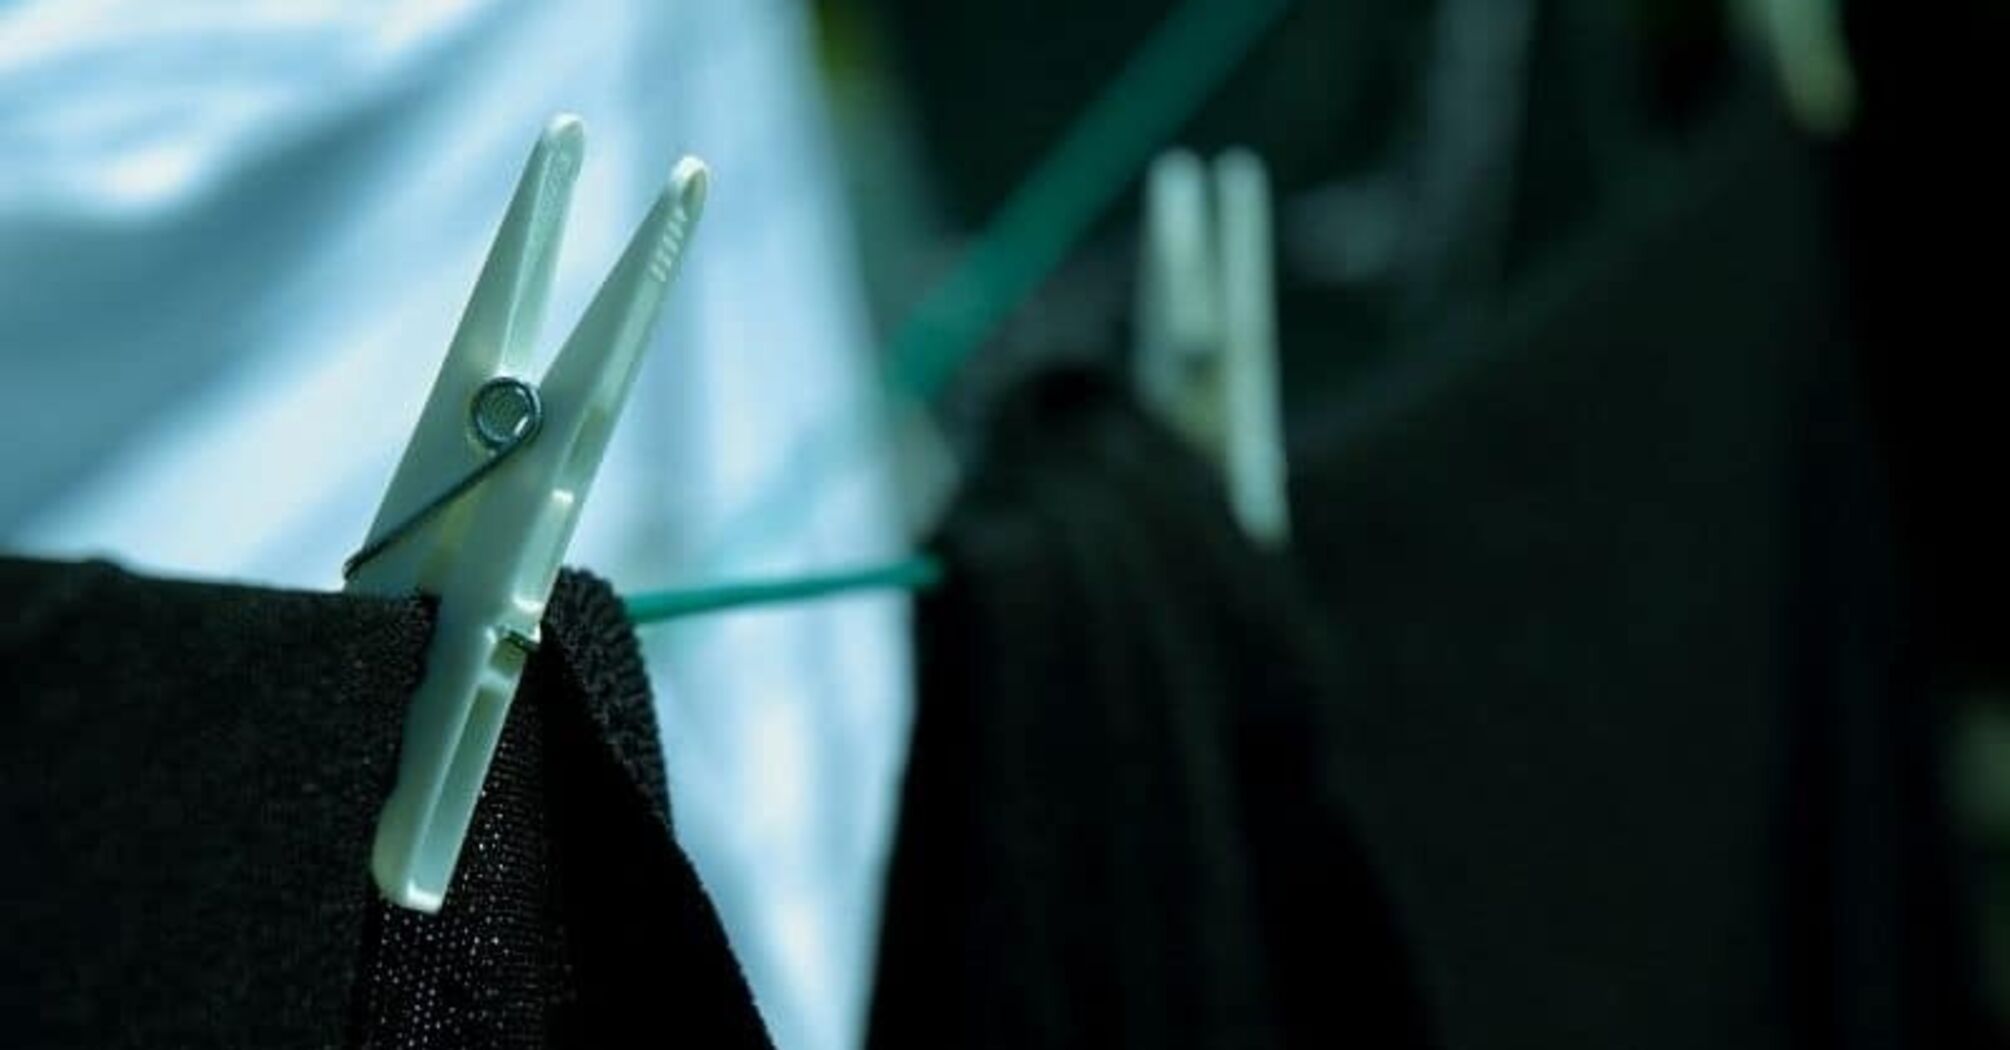 Avoid Hanging Clothes Out at Night: A Japanese Superstition